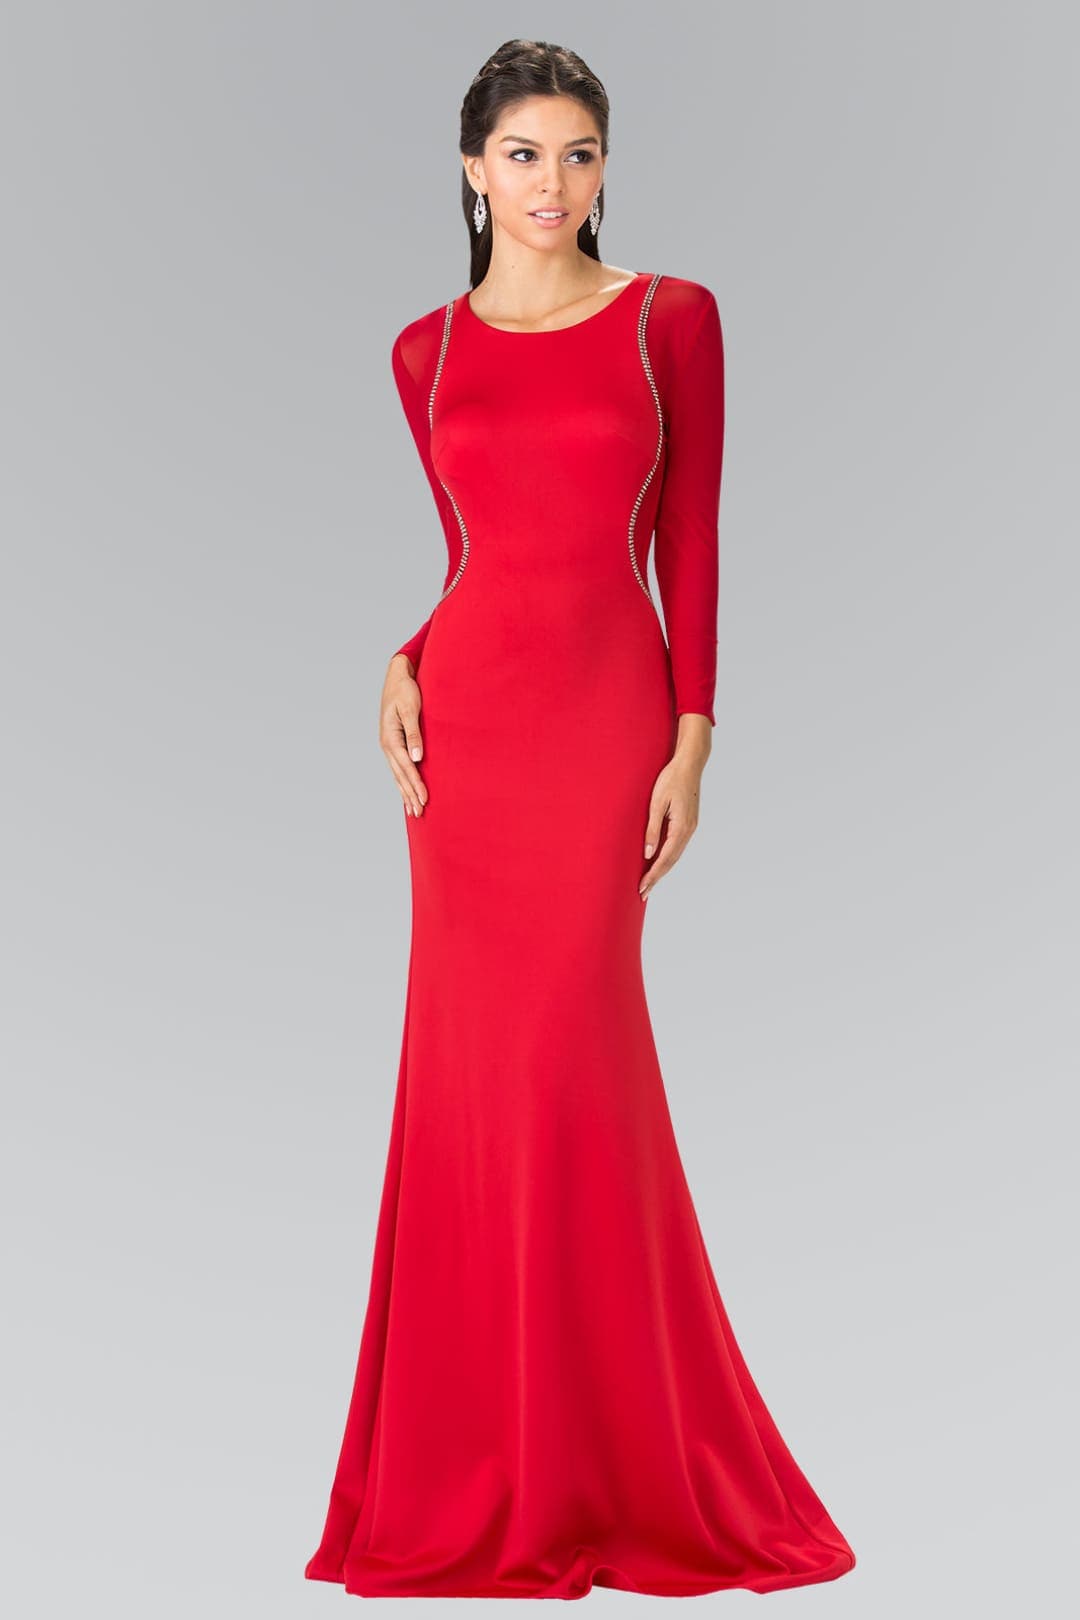 Long Sleeve Formal Gown - RED / XS